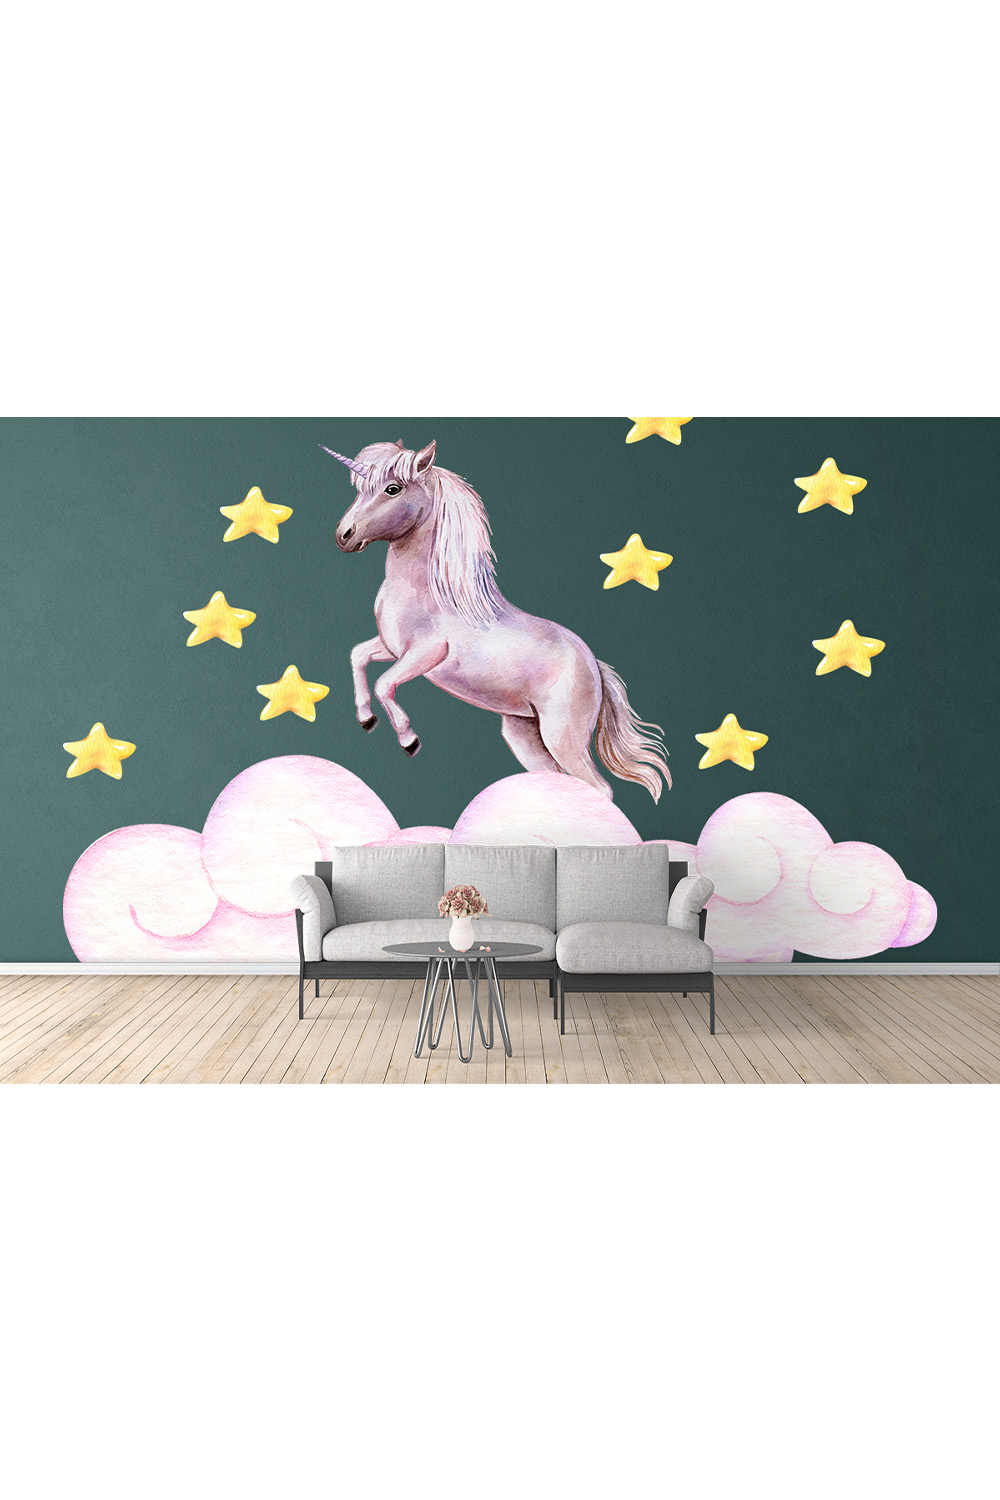 Colorful picture of a unicorn on the wall